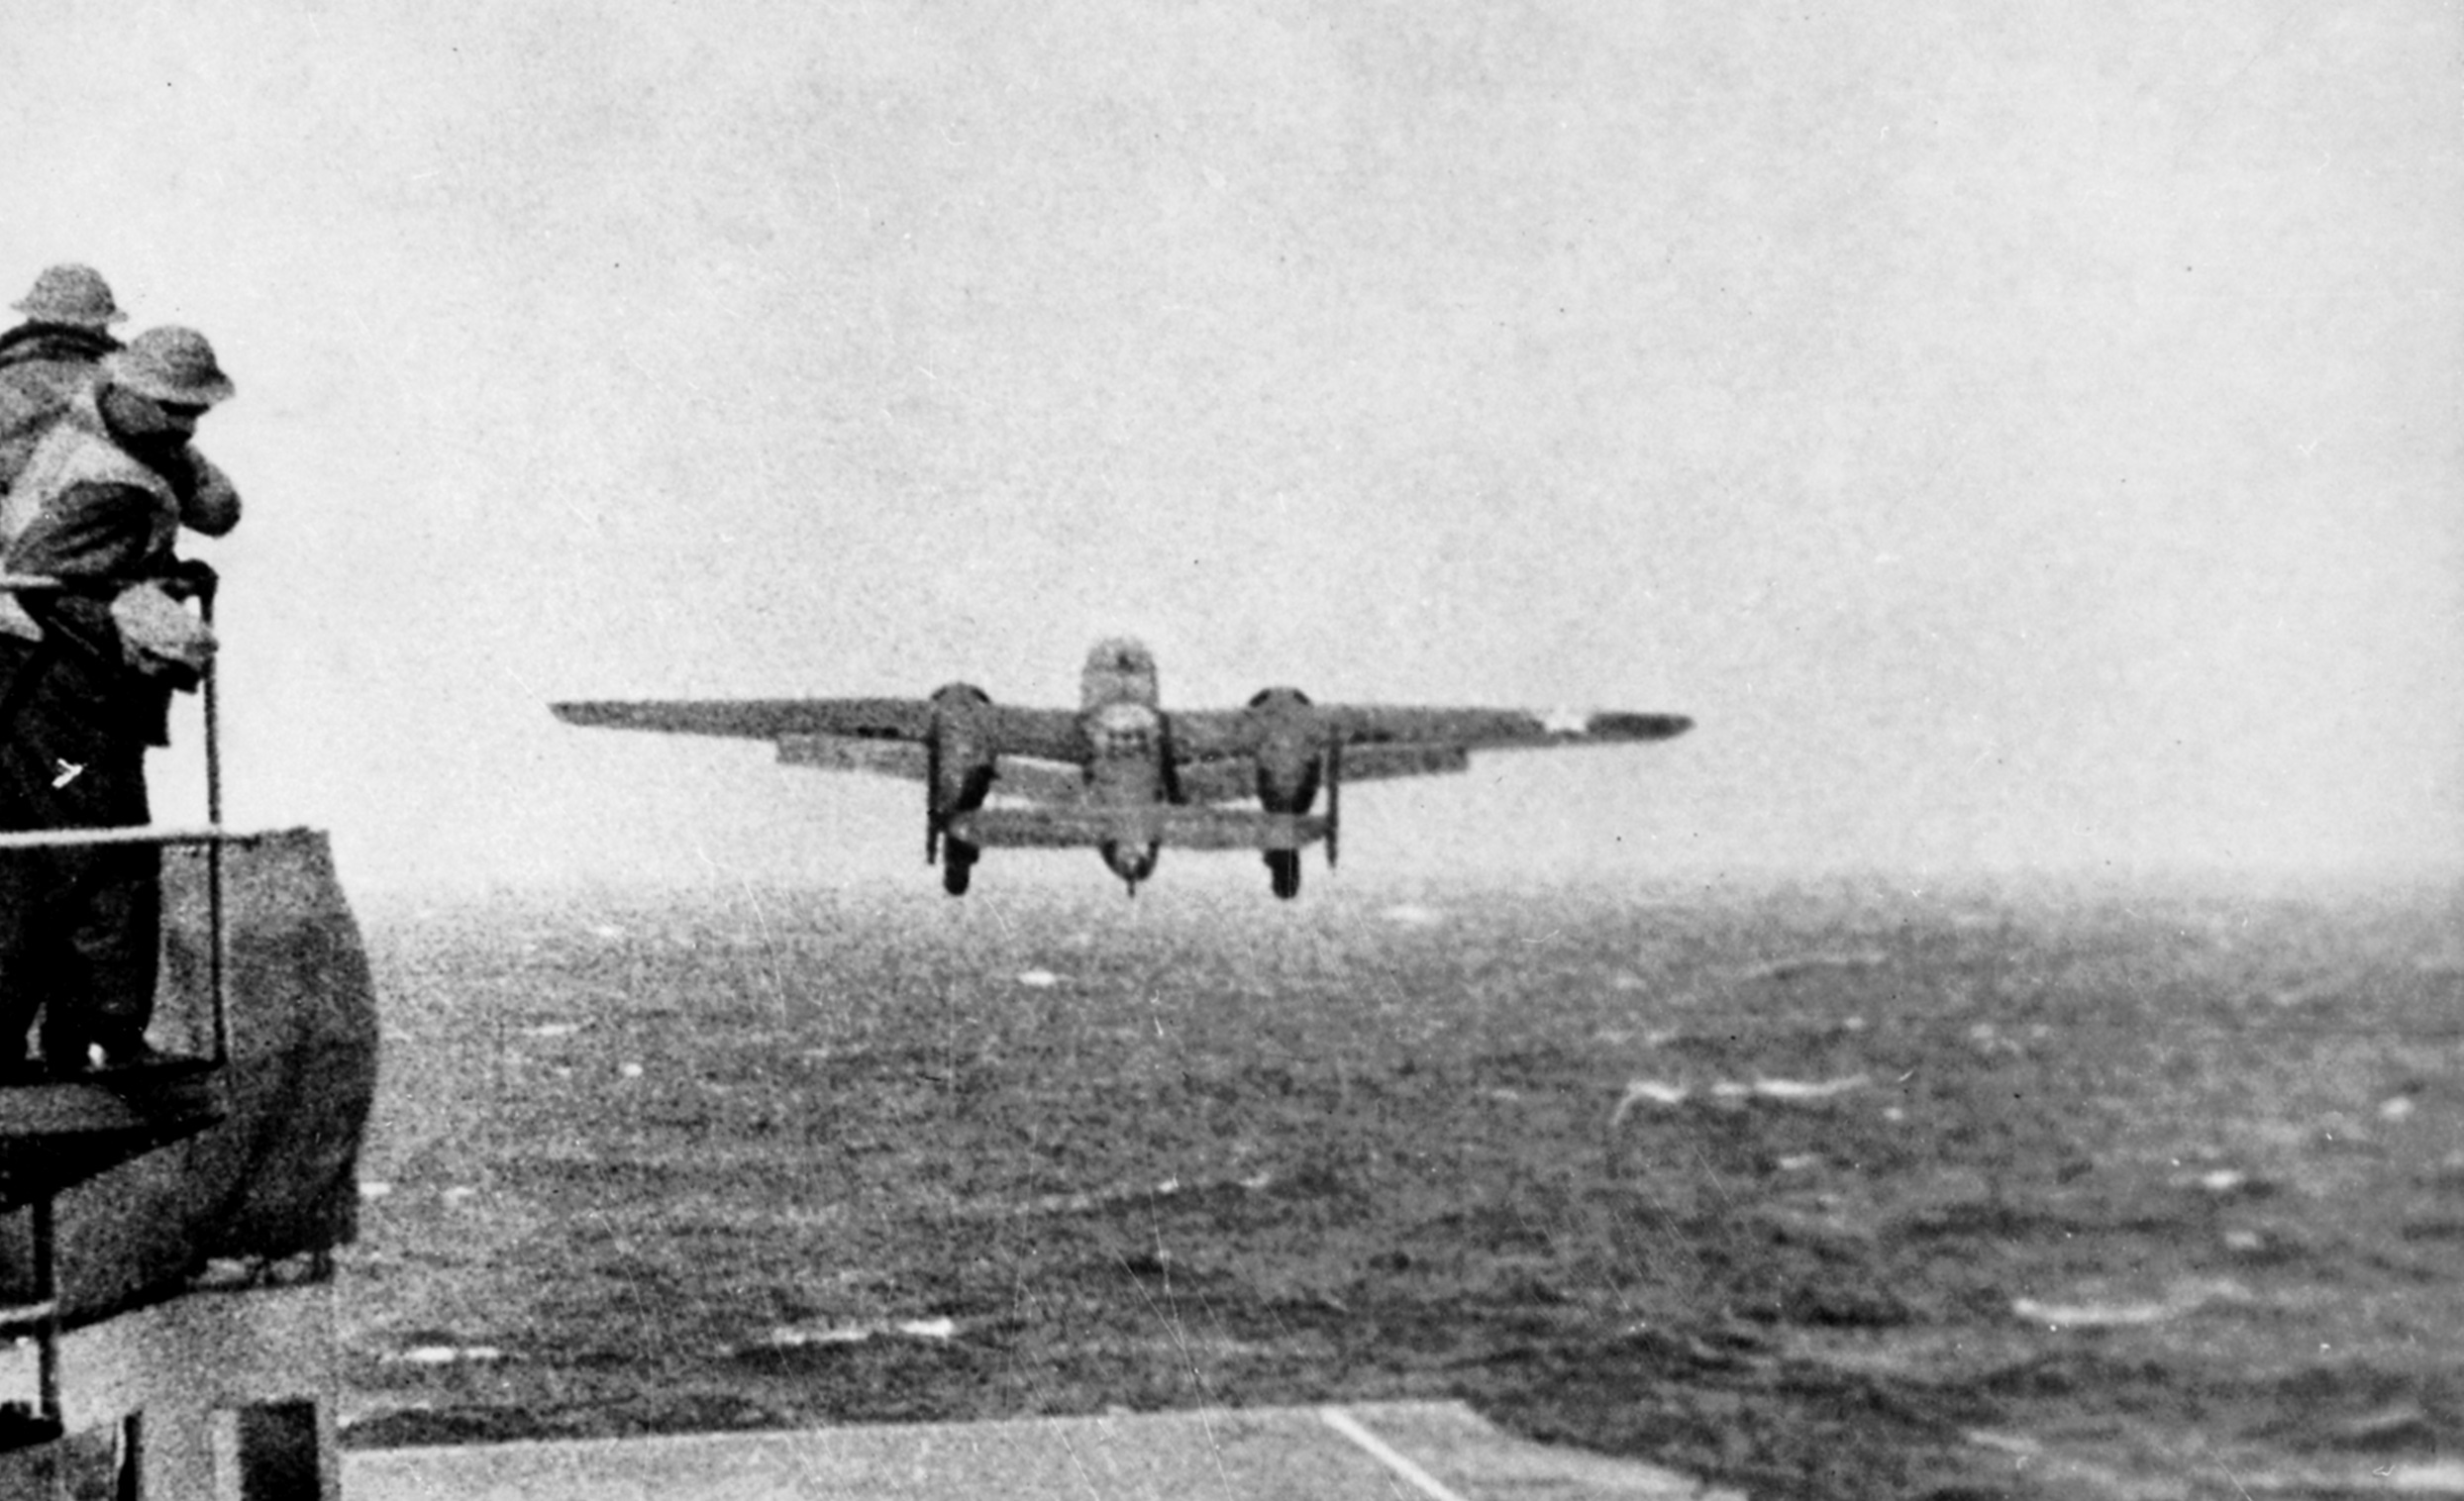 Just 30 Seconds Over Tokyo How The Doolittle Raid Doomed The Japanese Empire The National Interest